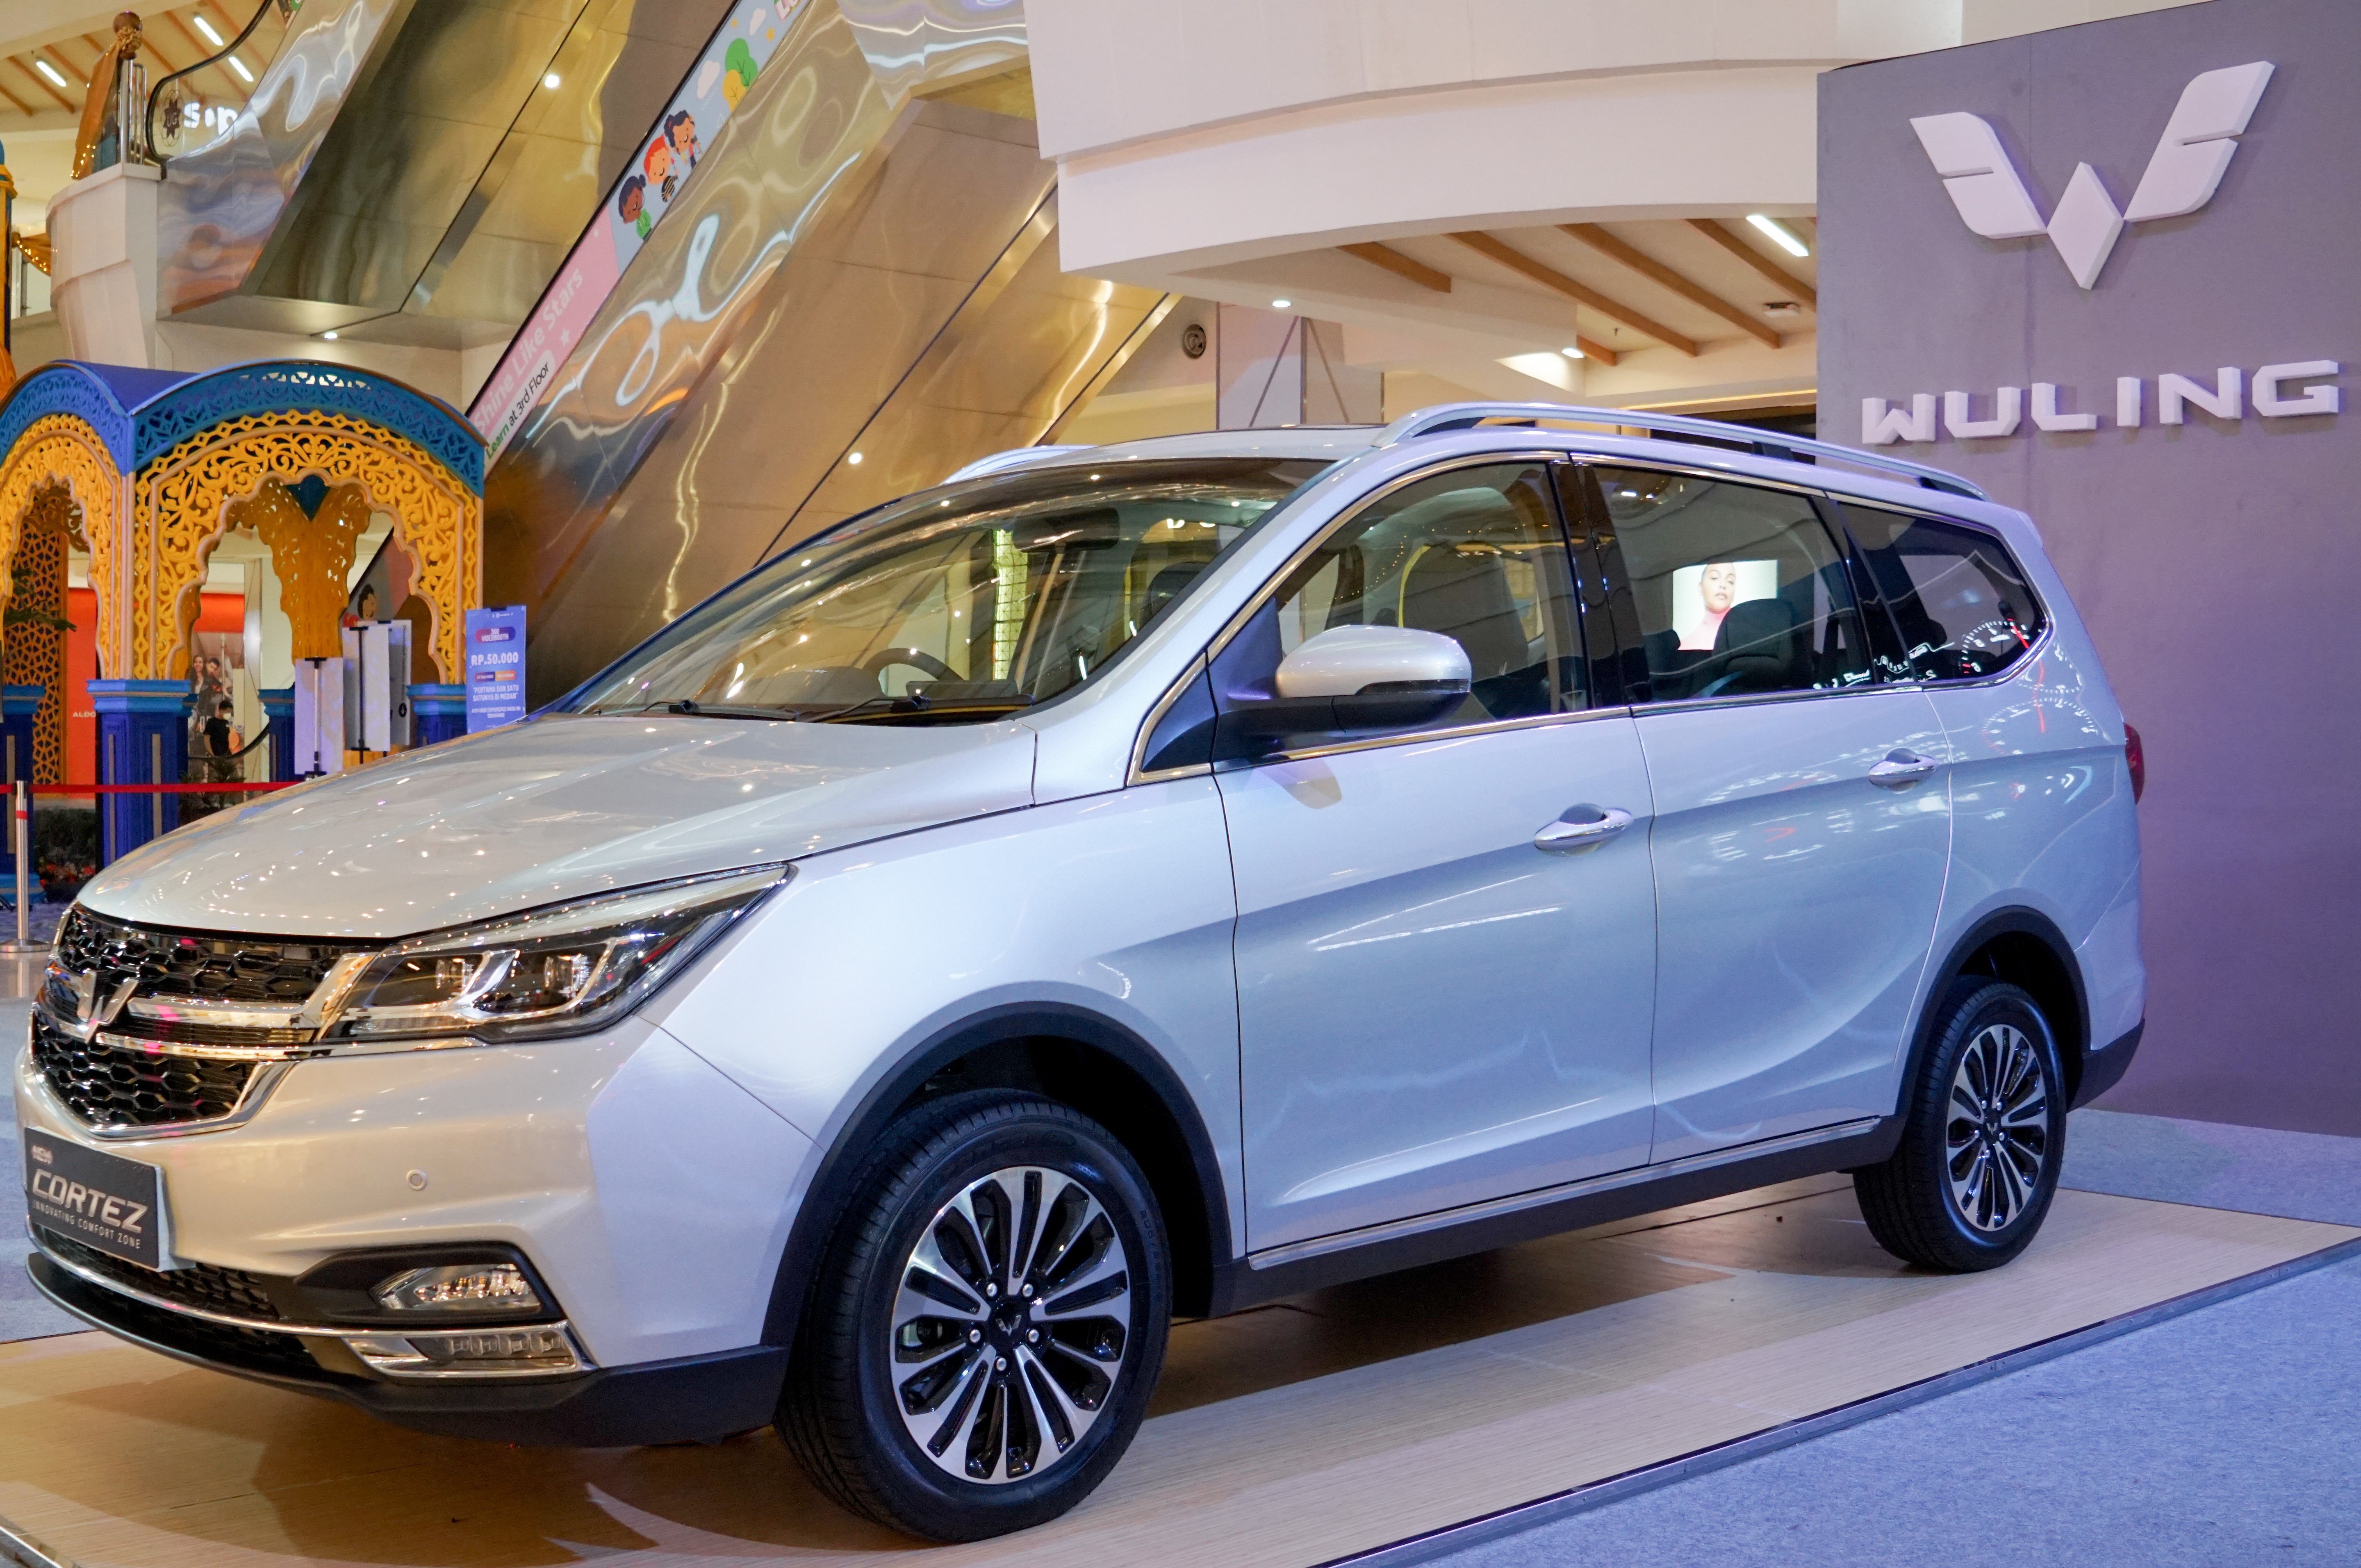 Image Wuling New Cortez Officially Greets People in Medan